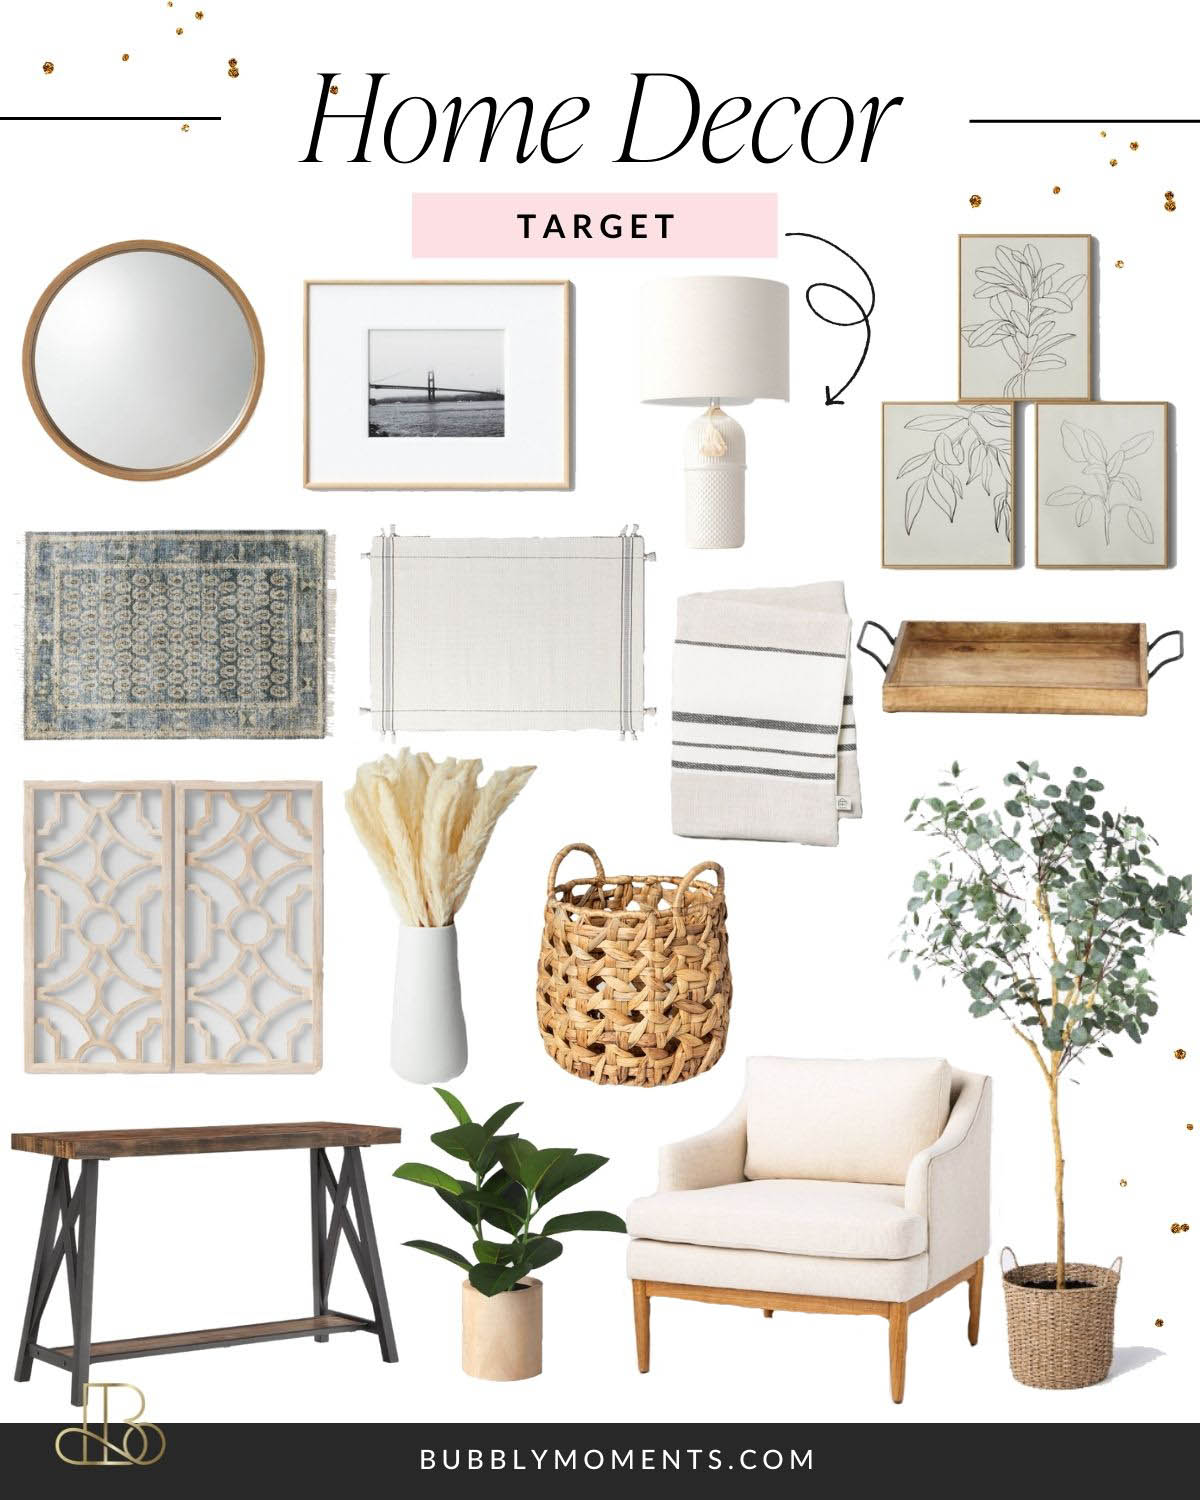 15 Beautiful Home Décor Items We LOVE from Target!